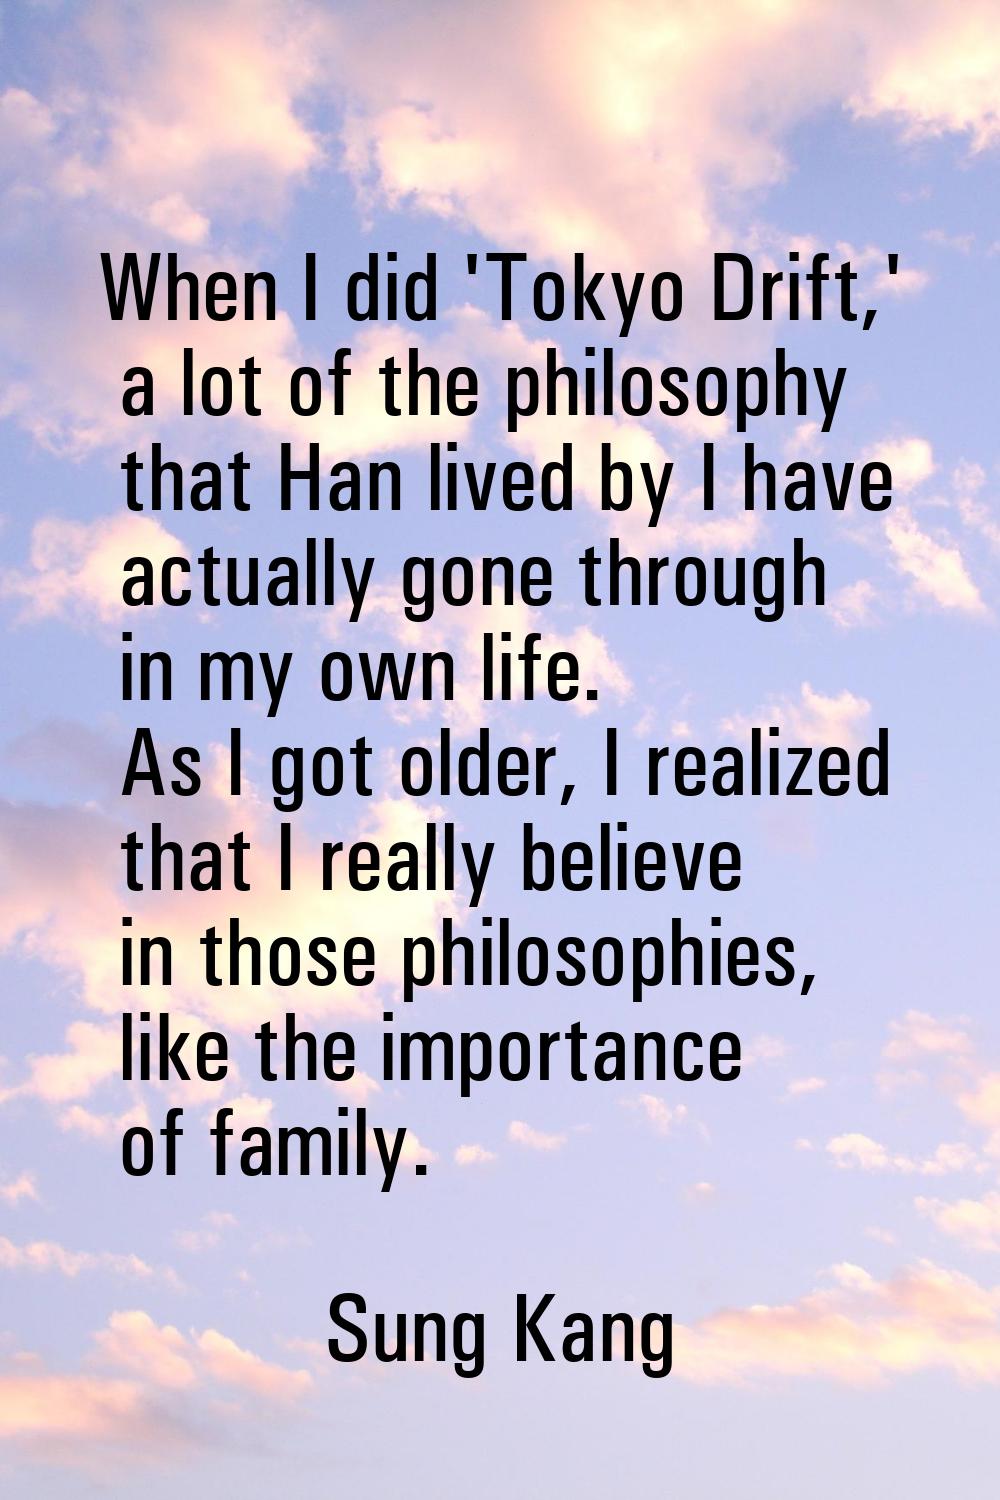 When I did 'Tokyo Drift,' a lot of the philosophy that Han lived by I have actually gone through in